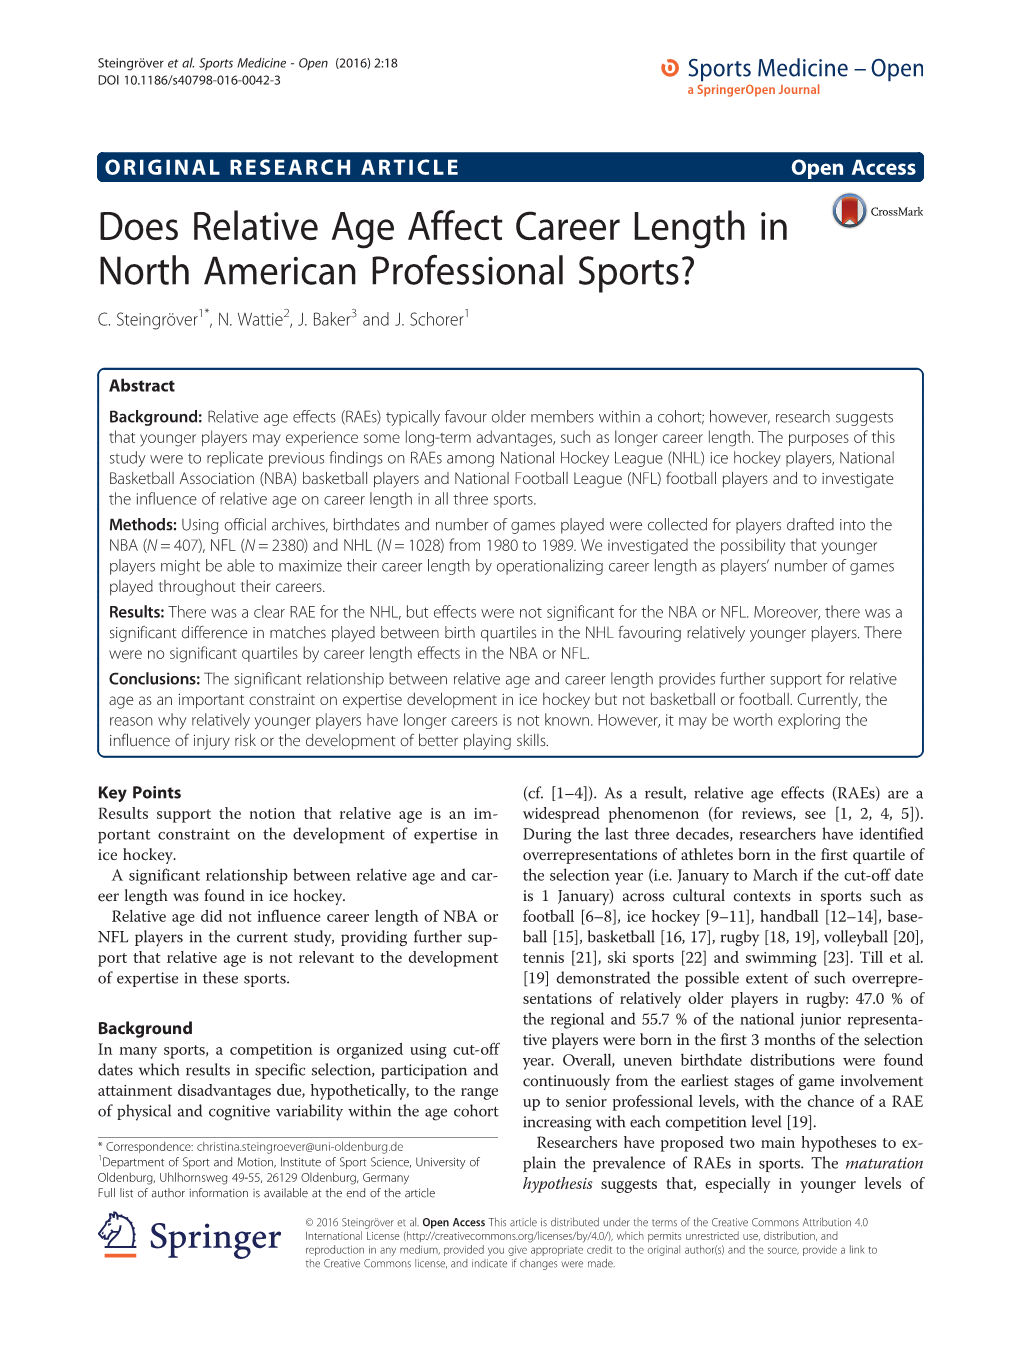 Does Relative Age Affect Career Length in North American Professional Sports? C